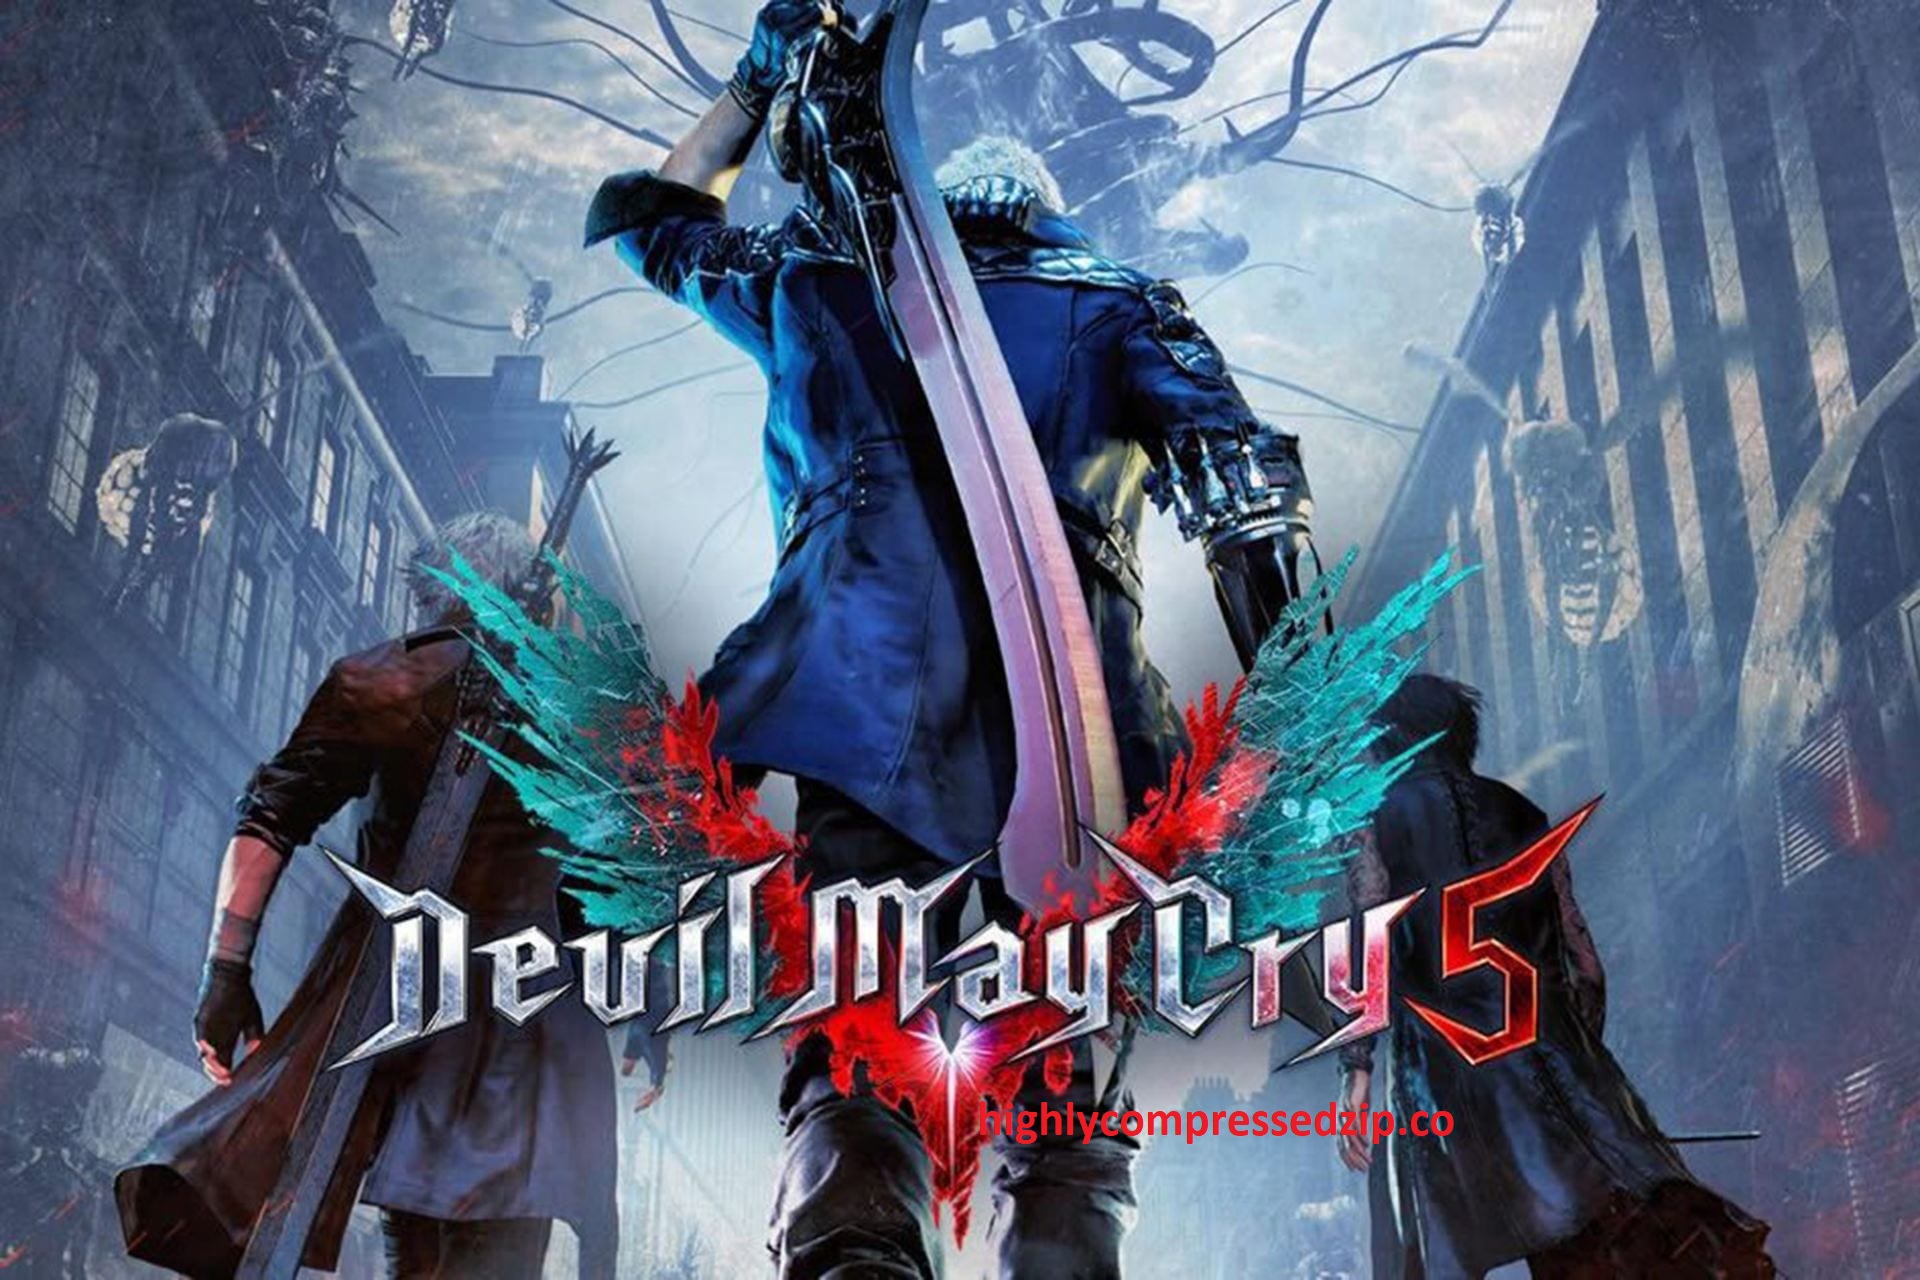 download devil may cry 5 pc full version highly compressed